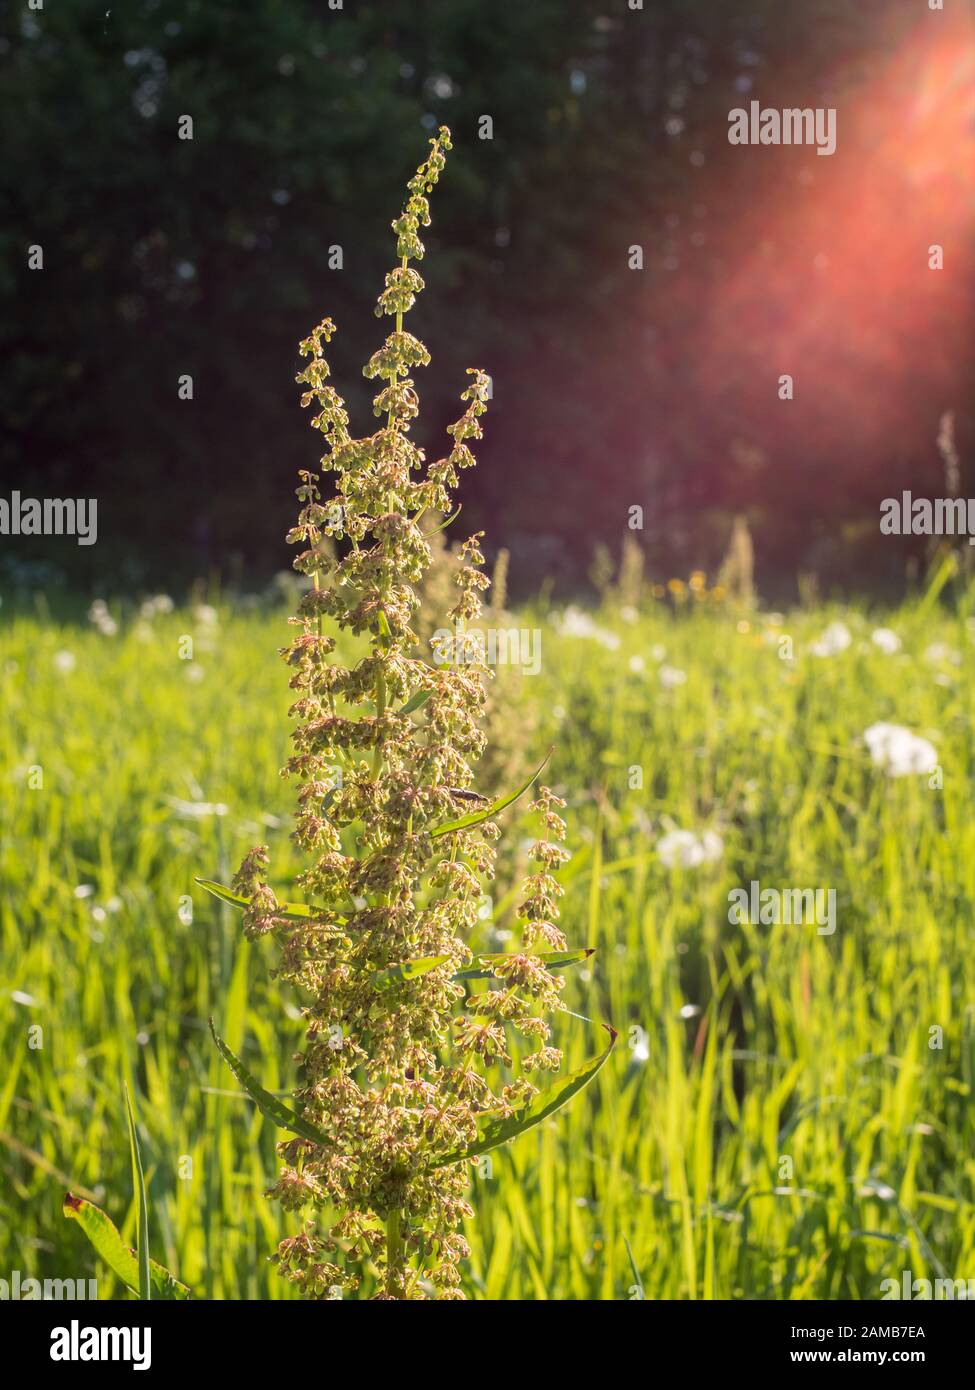 Dock plant at green hay field with backlight lens flare Stock Photo